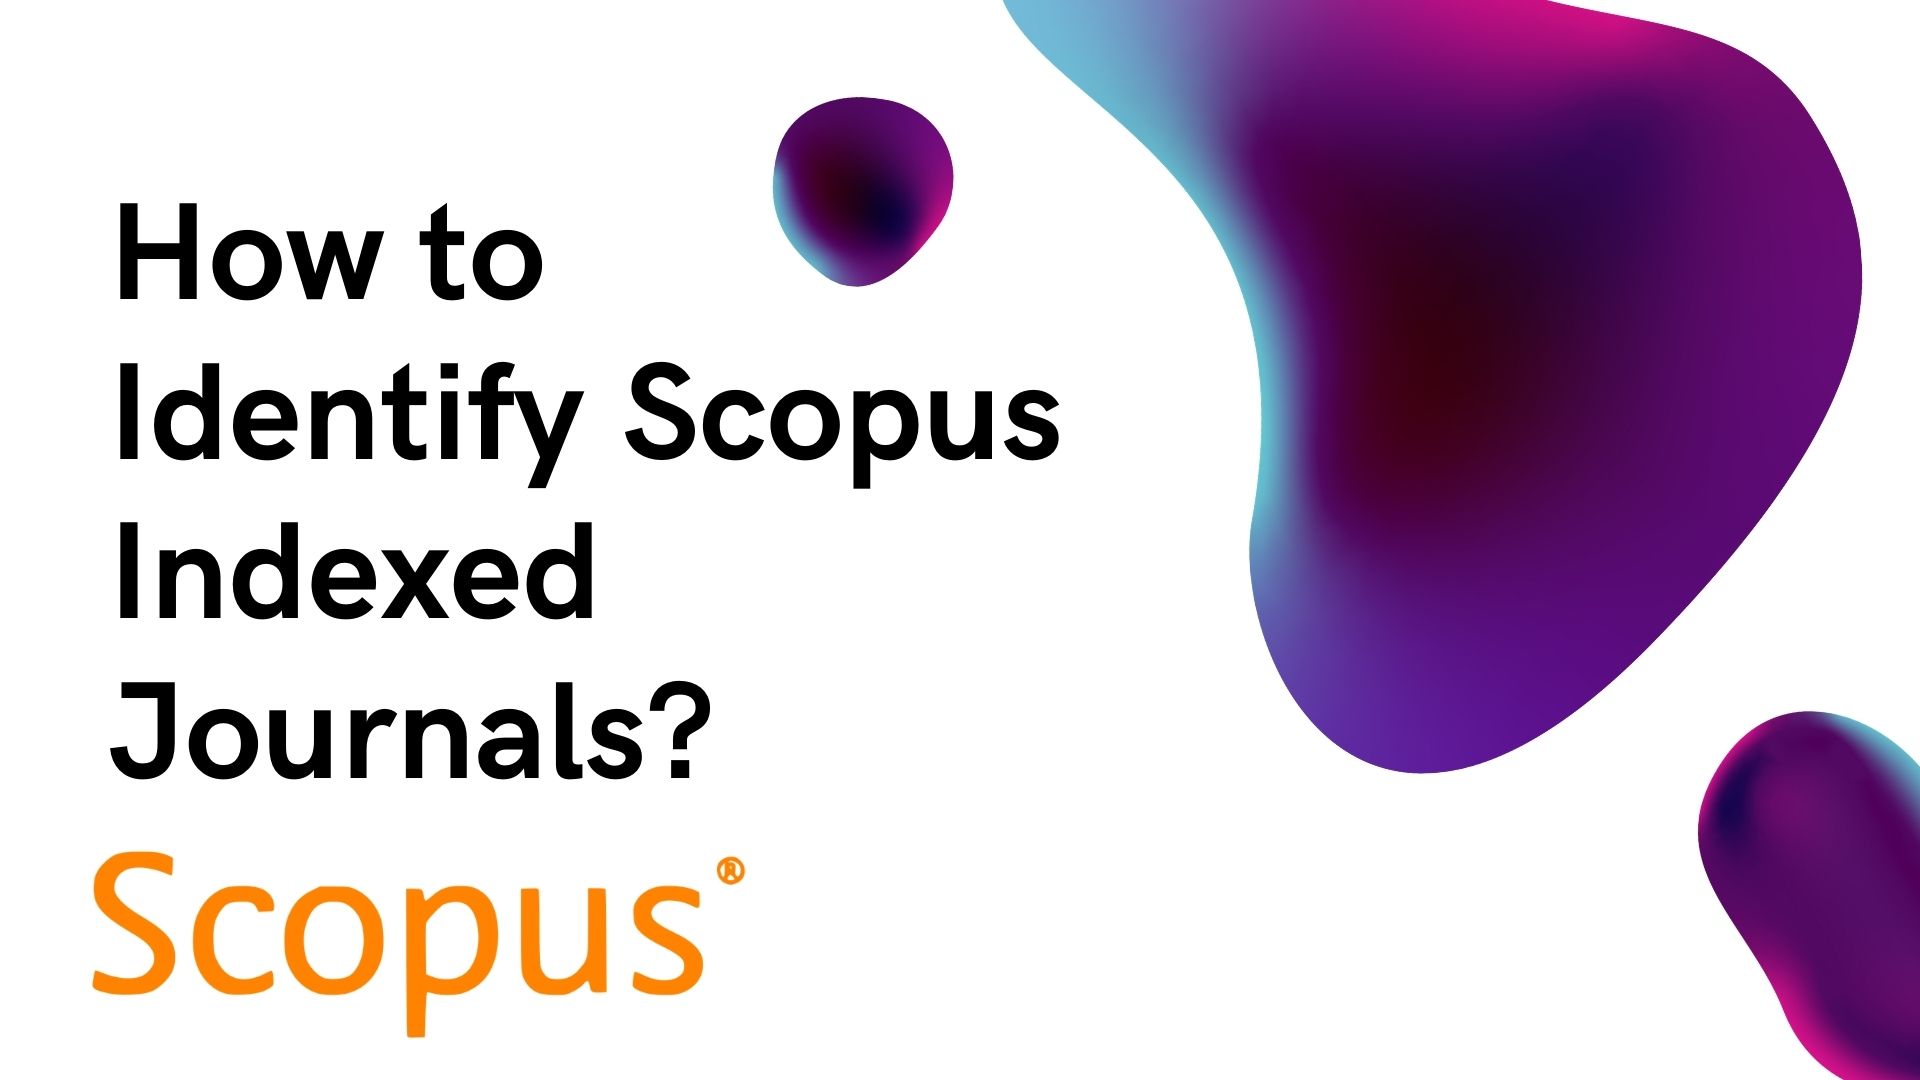 scopus research article search